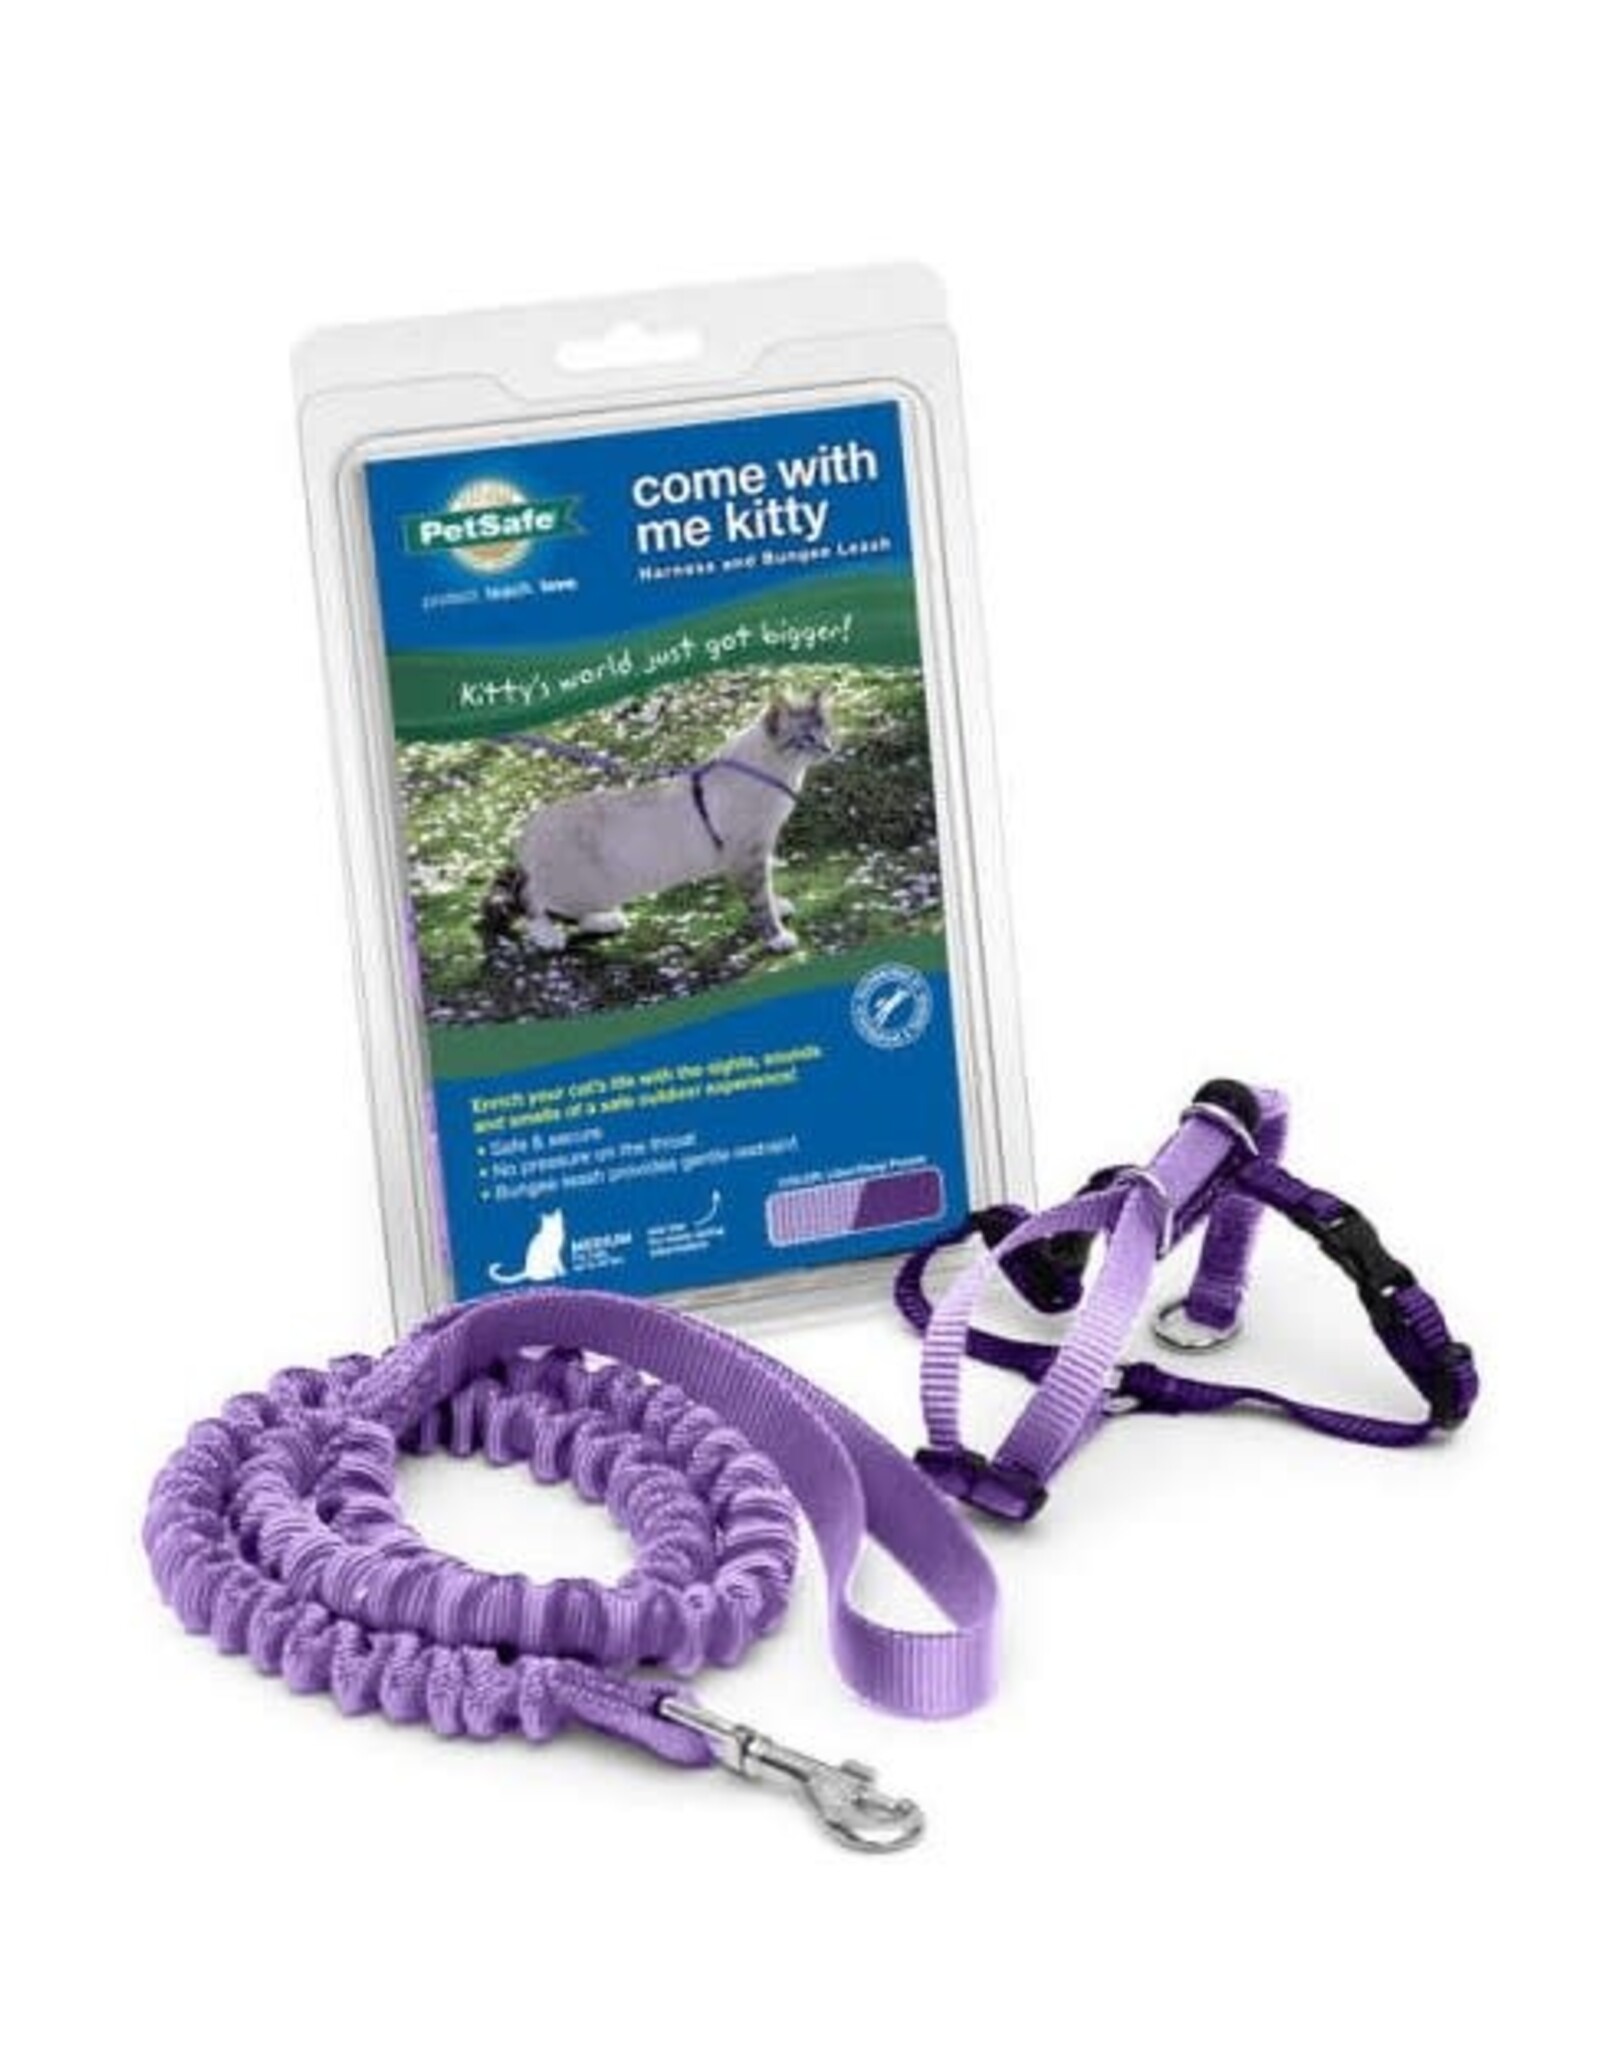 RADIO SYSTEMS CORP(PET SAFE) Come With Me Kitty Harness & Bungee Leash Large Lilac